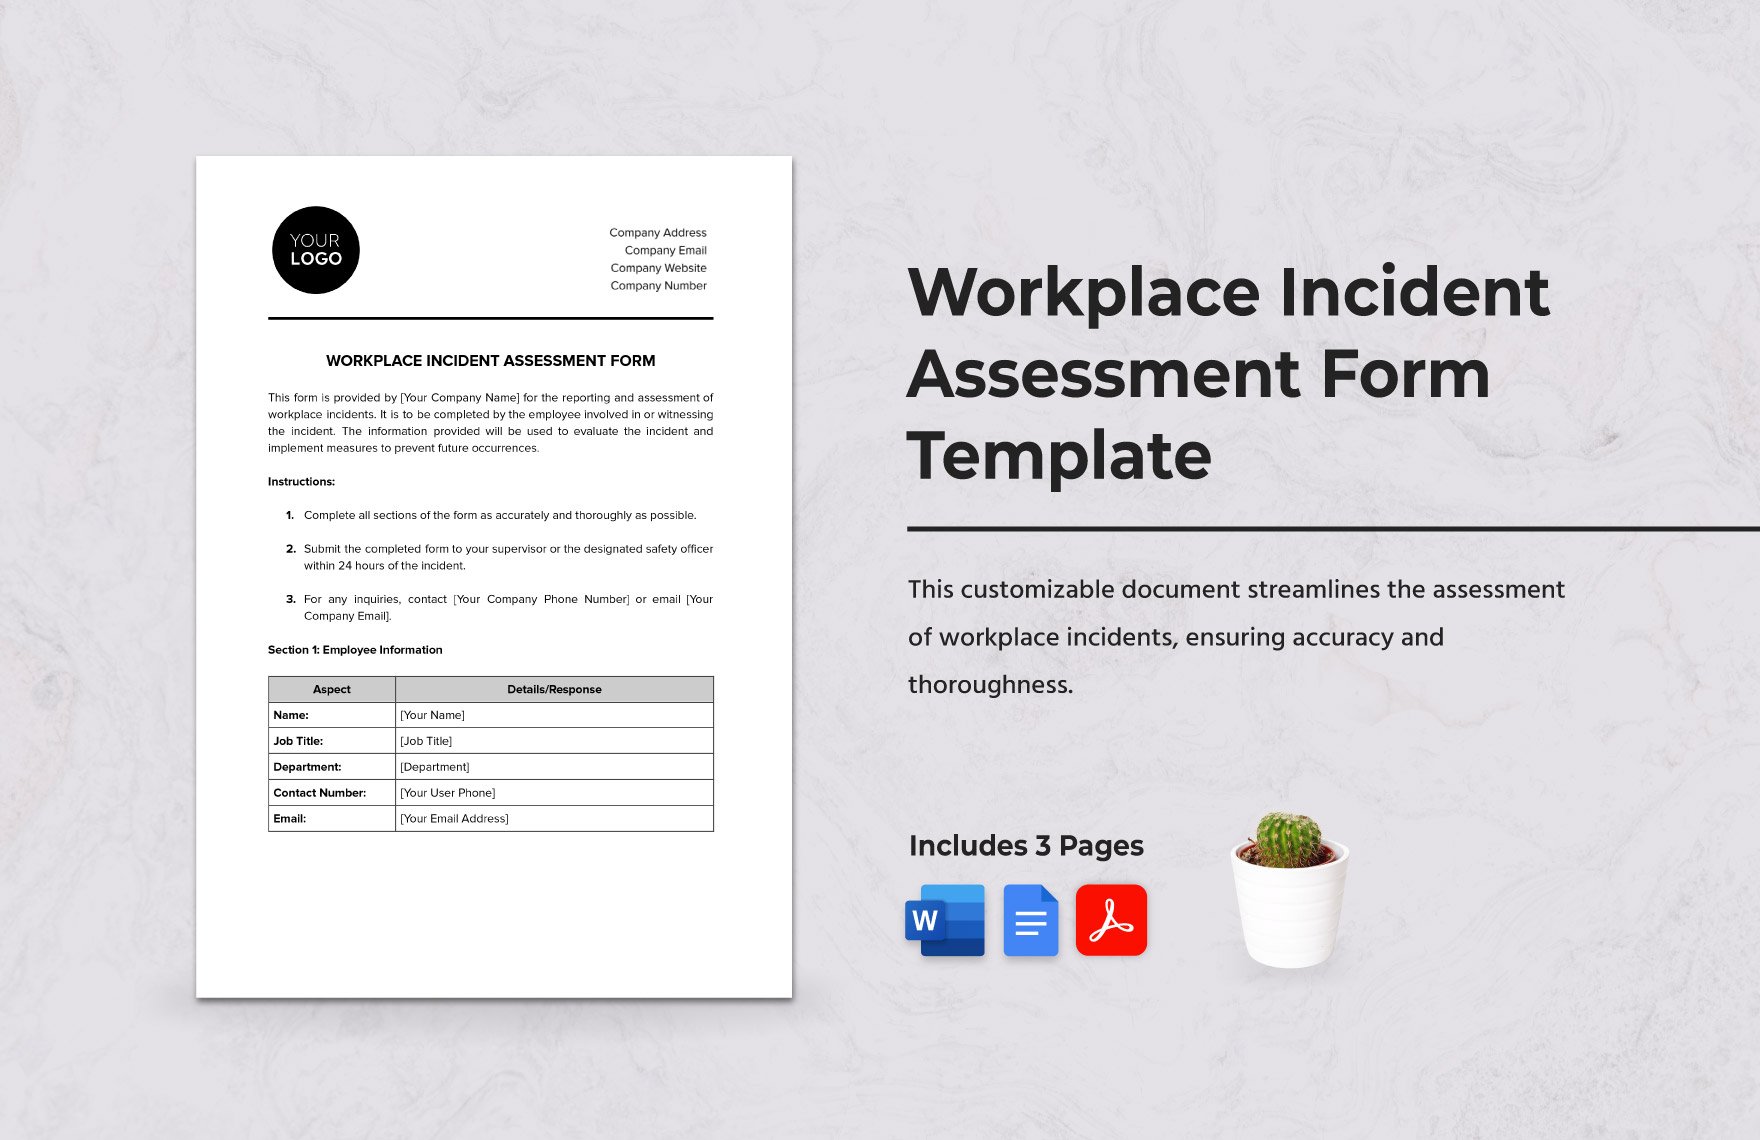 Workplace Incident Assessment Form Template in Word, Google Docs, PDF